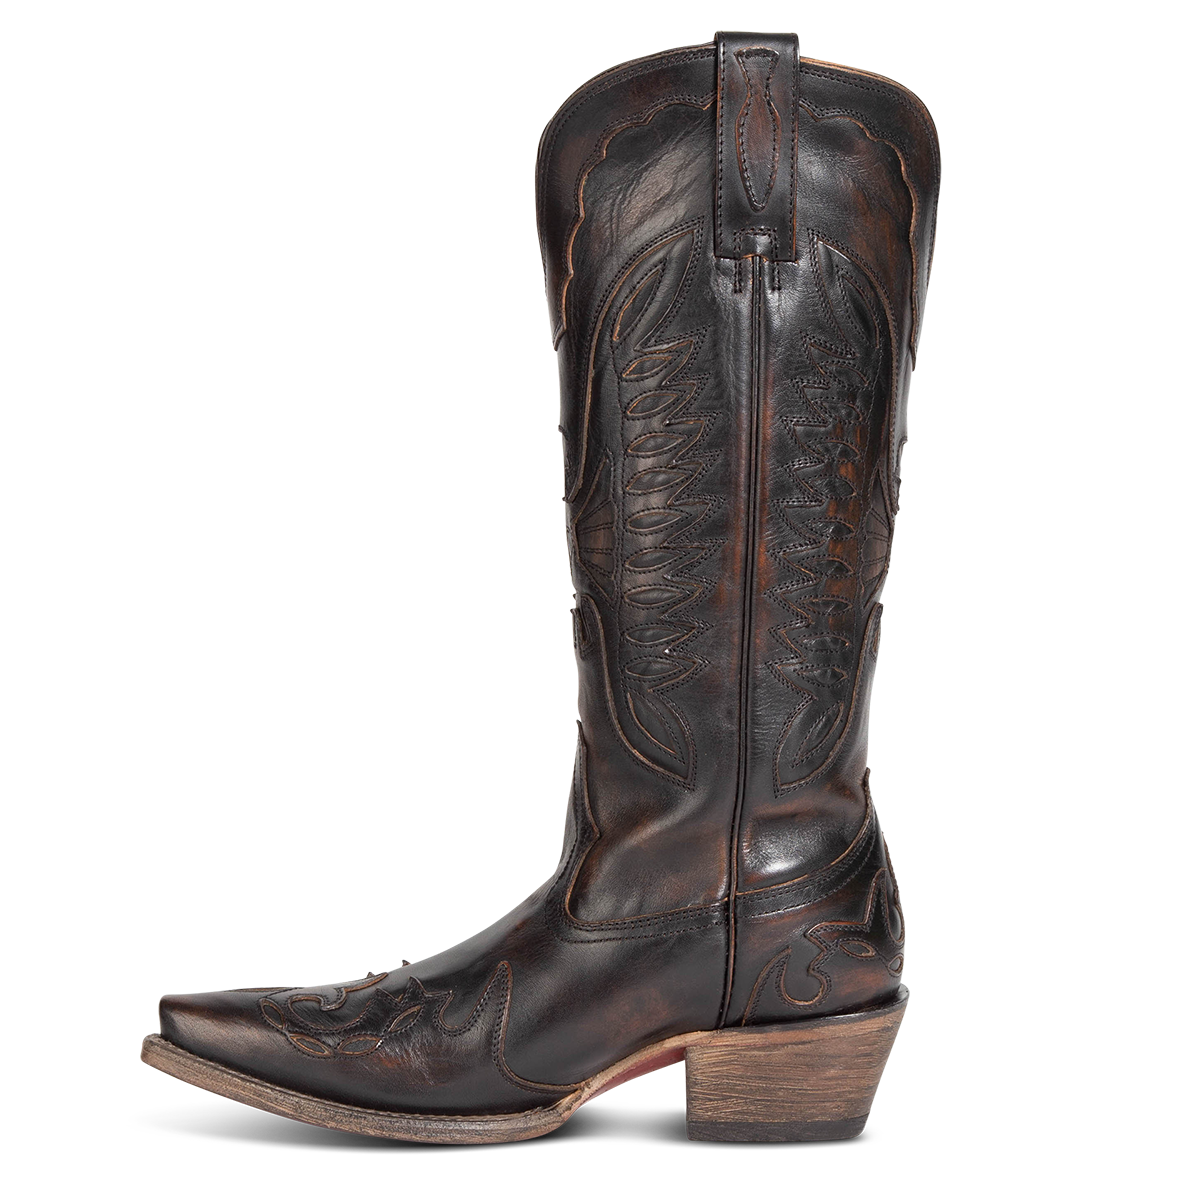 Side view showing textured design, stitch detailing and pull straps on FREEBIRD women's Willie black western leather boot